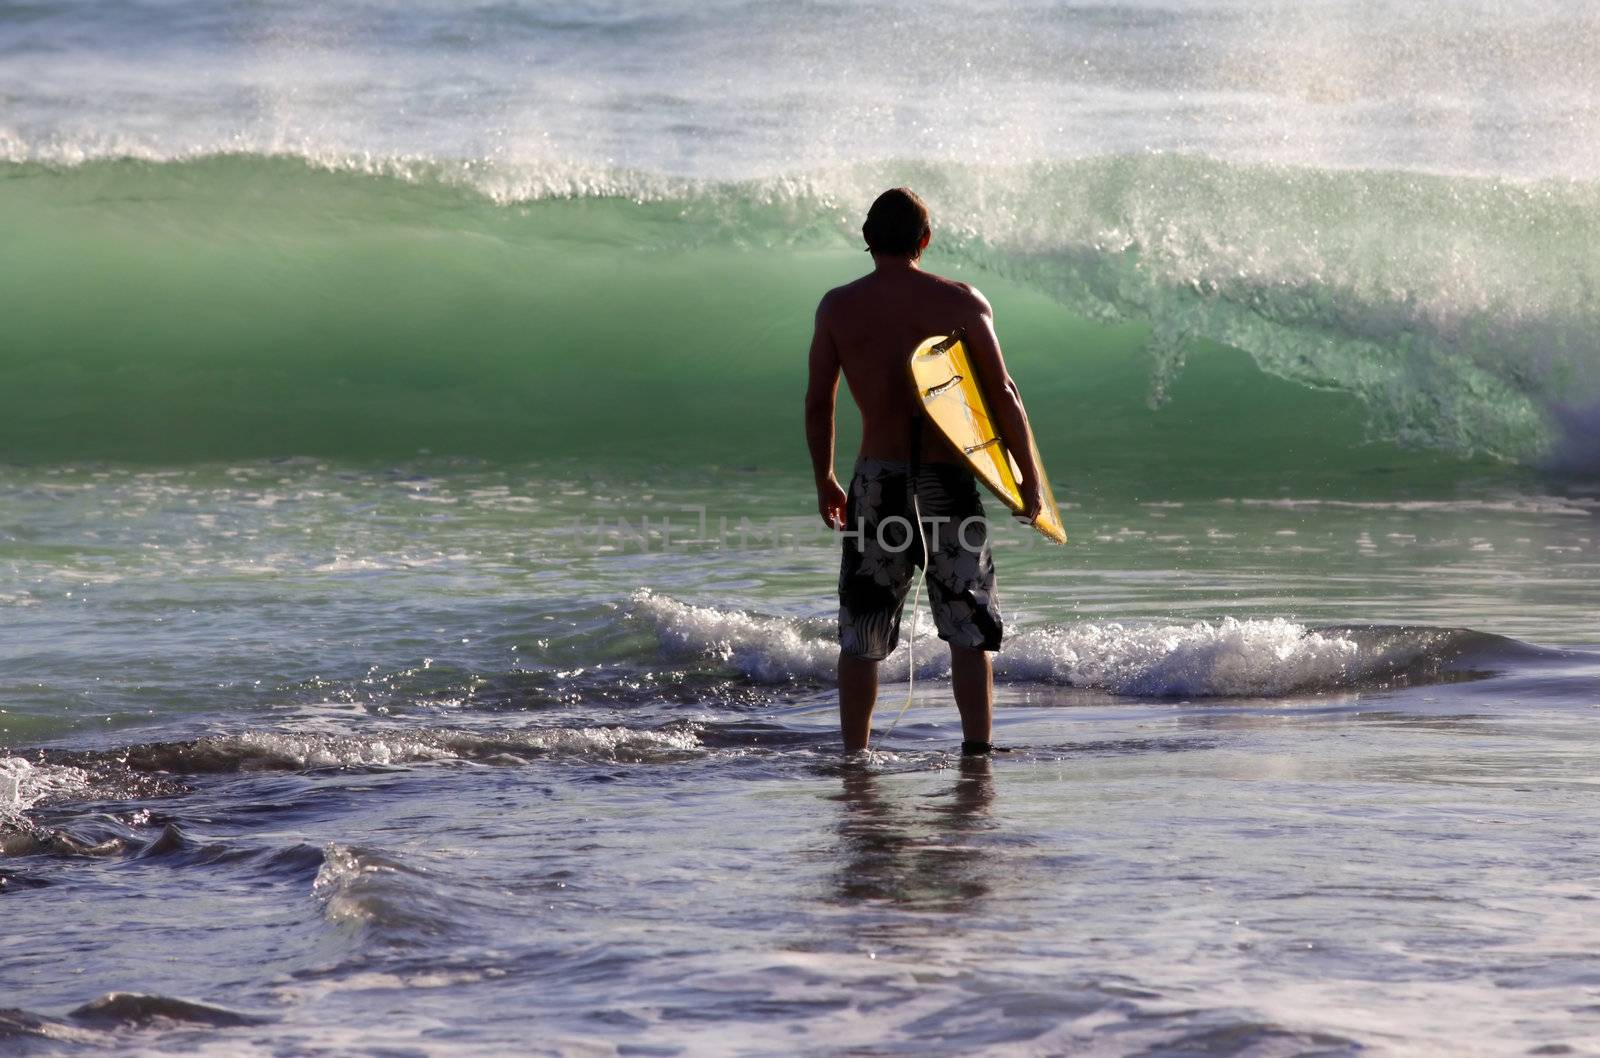 Surfer by friday